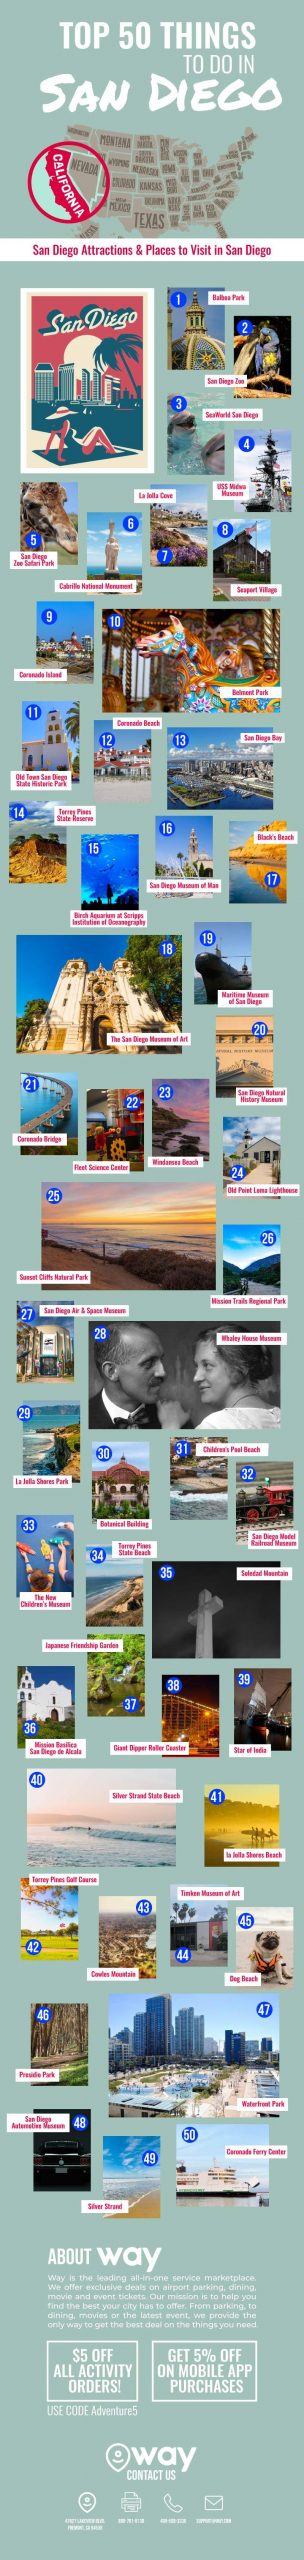 Top 50 Things to Do in San Diego